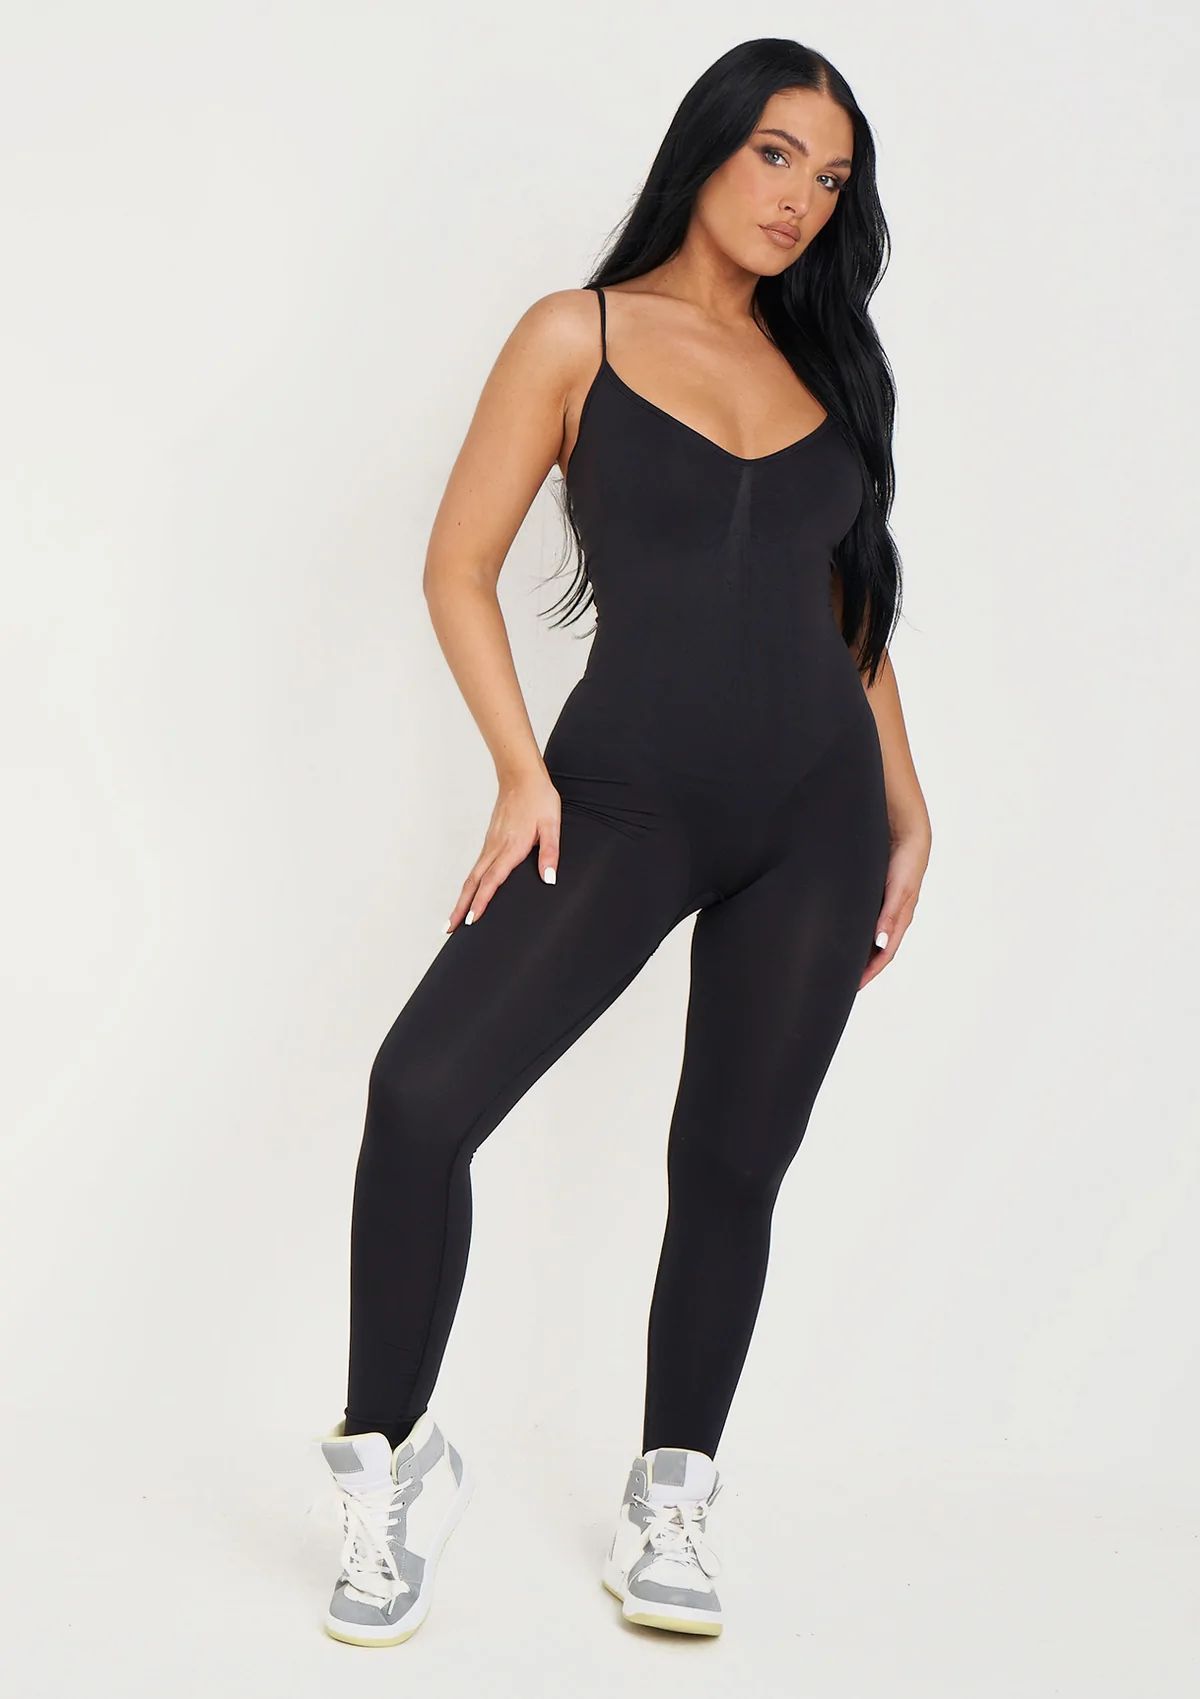 Adele Black Seamless Strappy All In One Jumpsuit | Missy Empire | Missy Empire (UK)